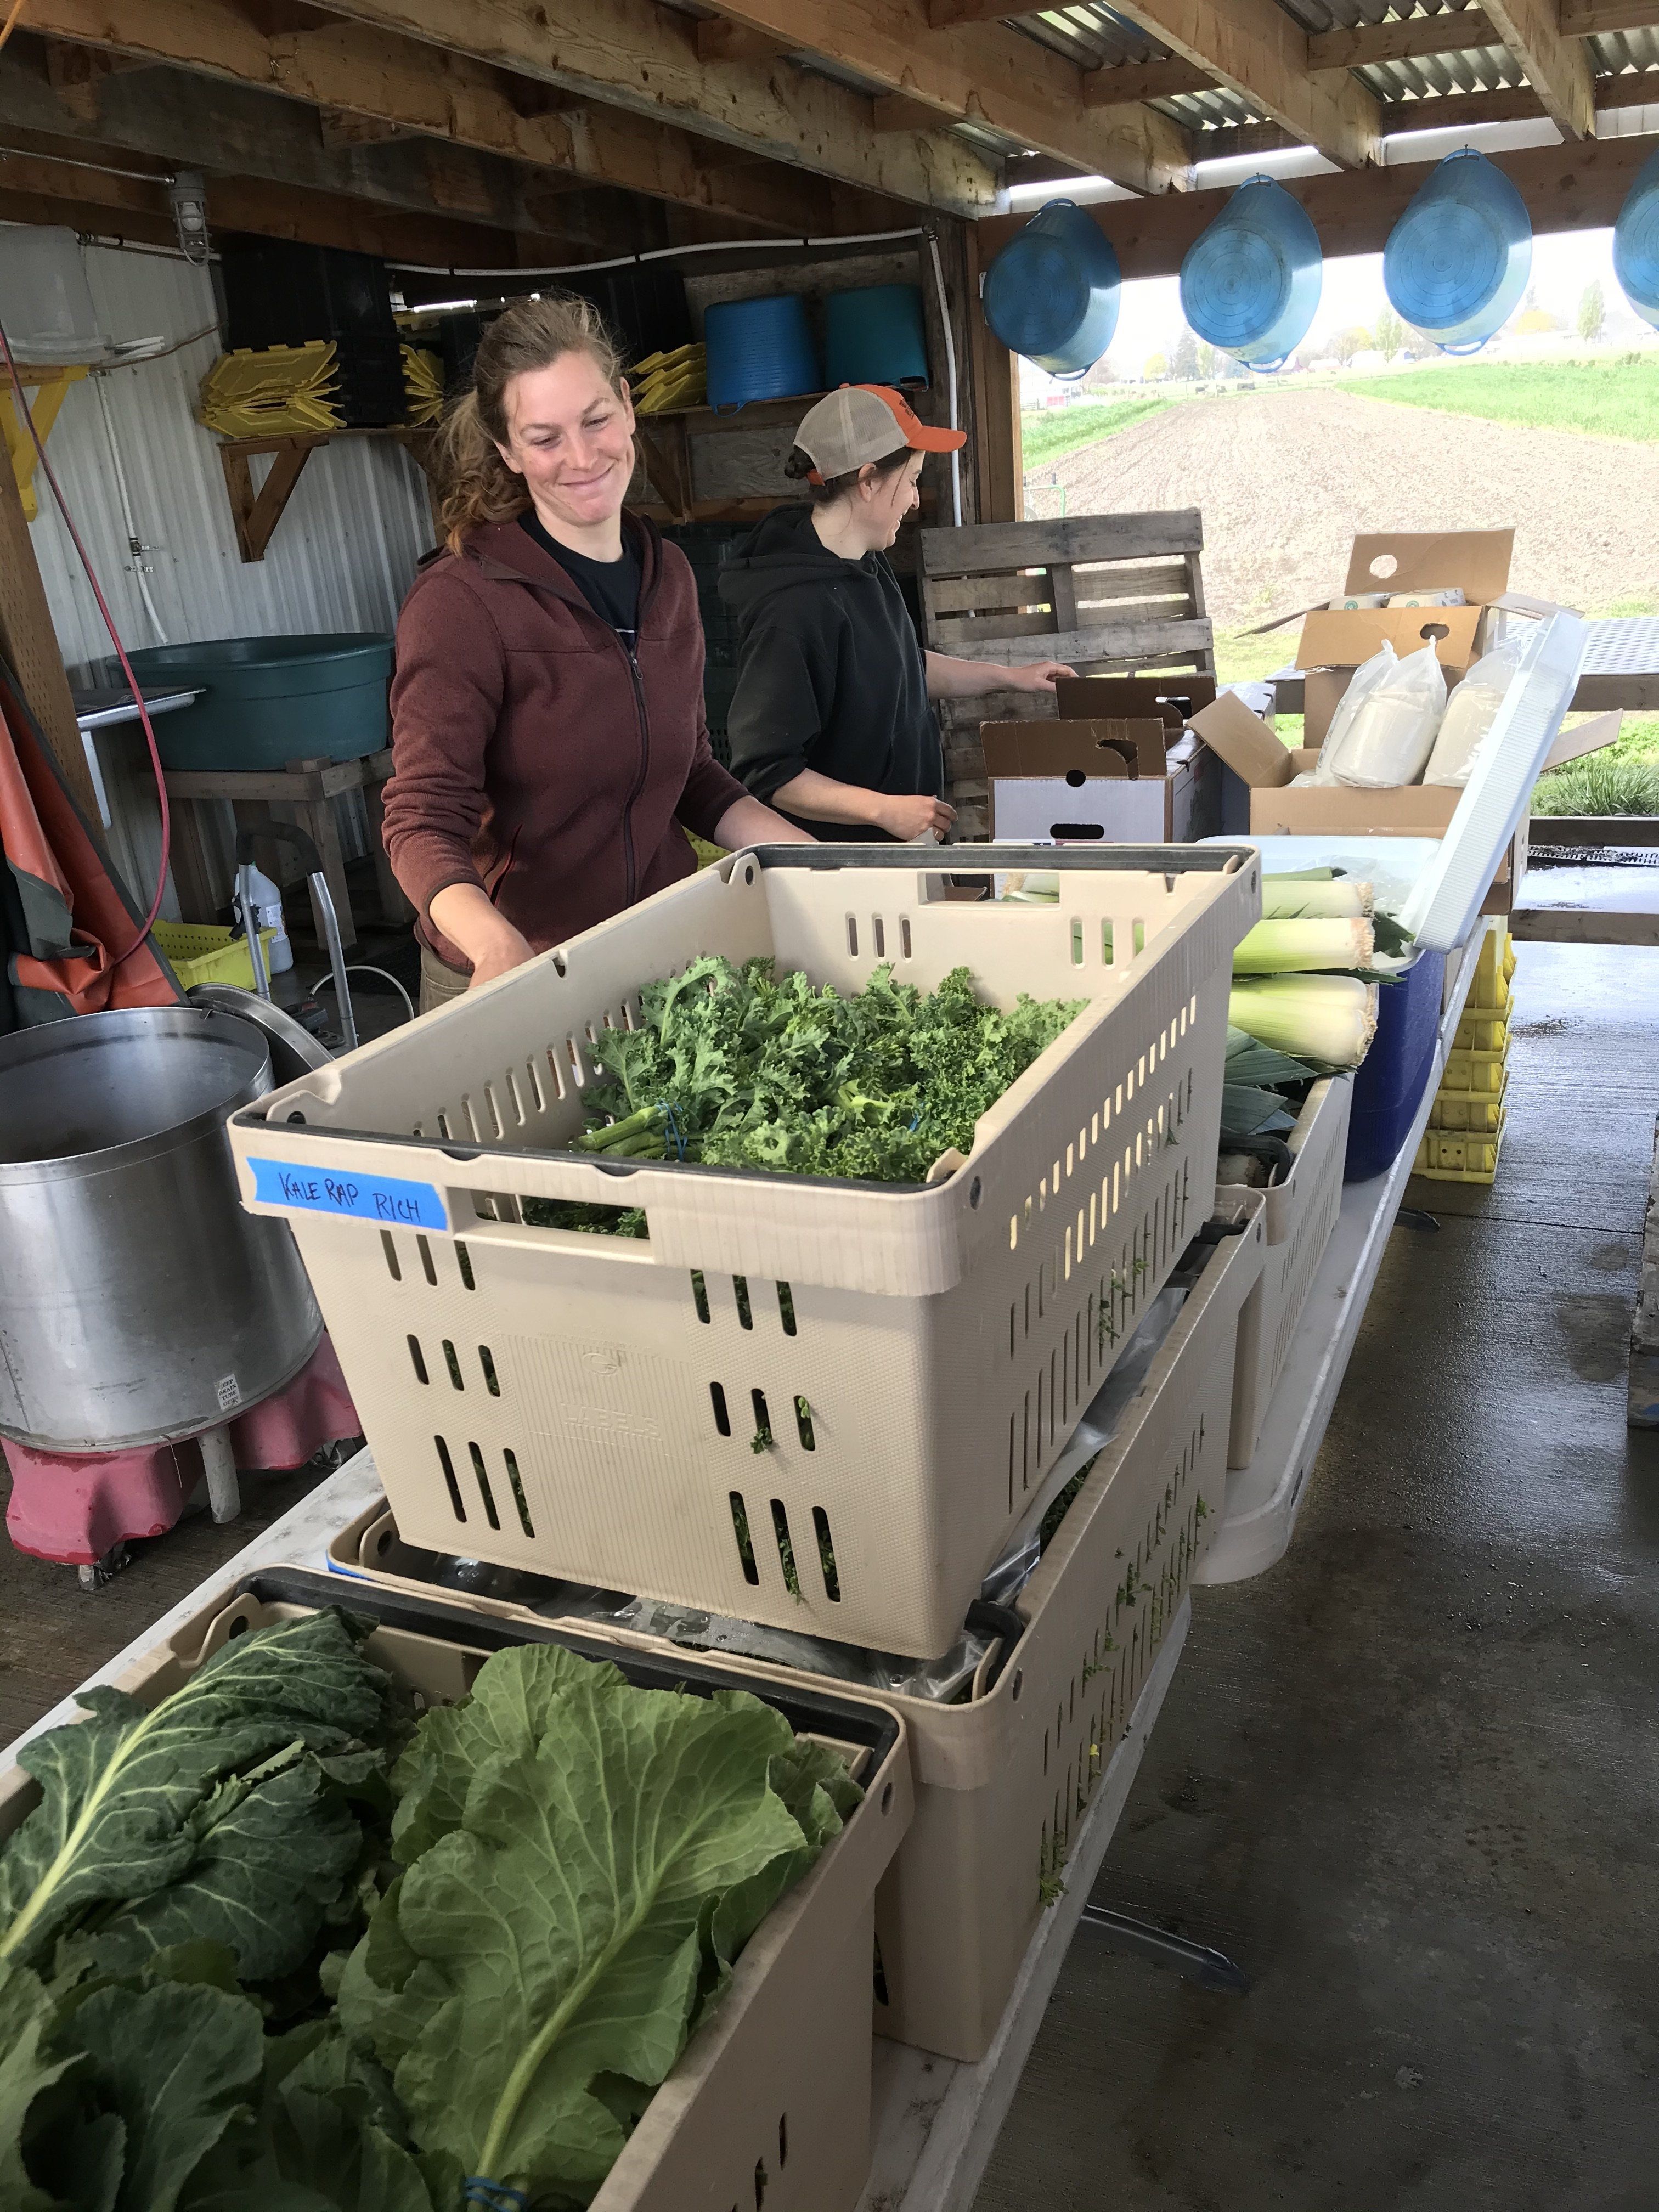 Previous Happening: Farm Happenings for April 14, 2020 (Richland)